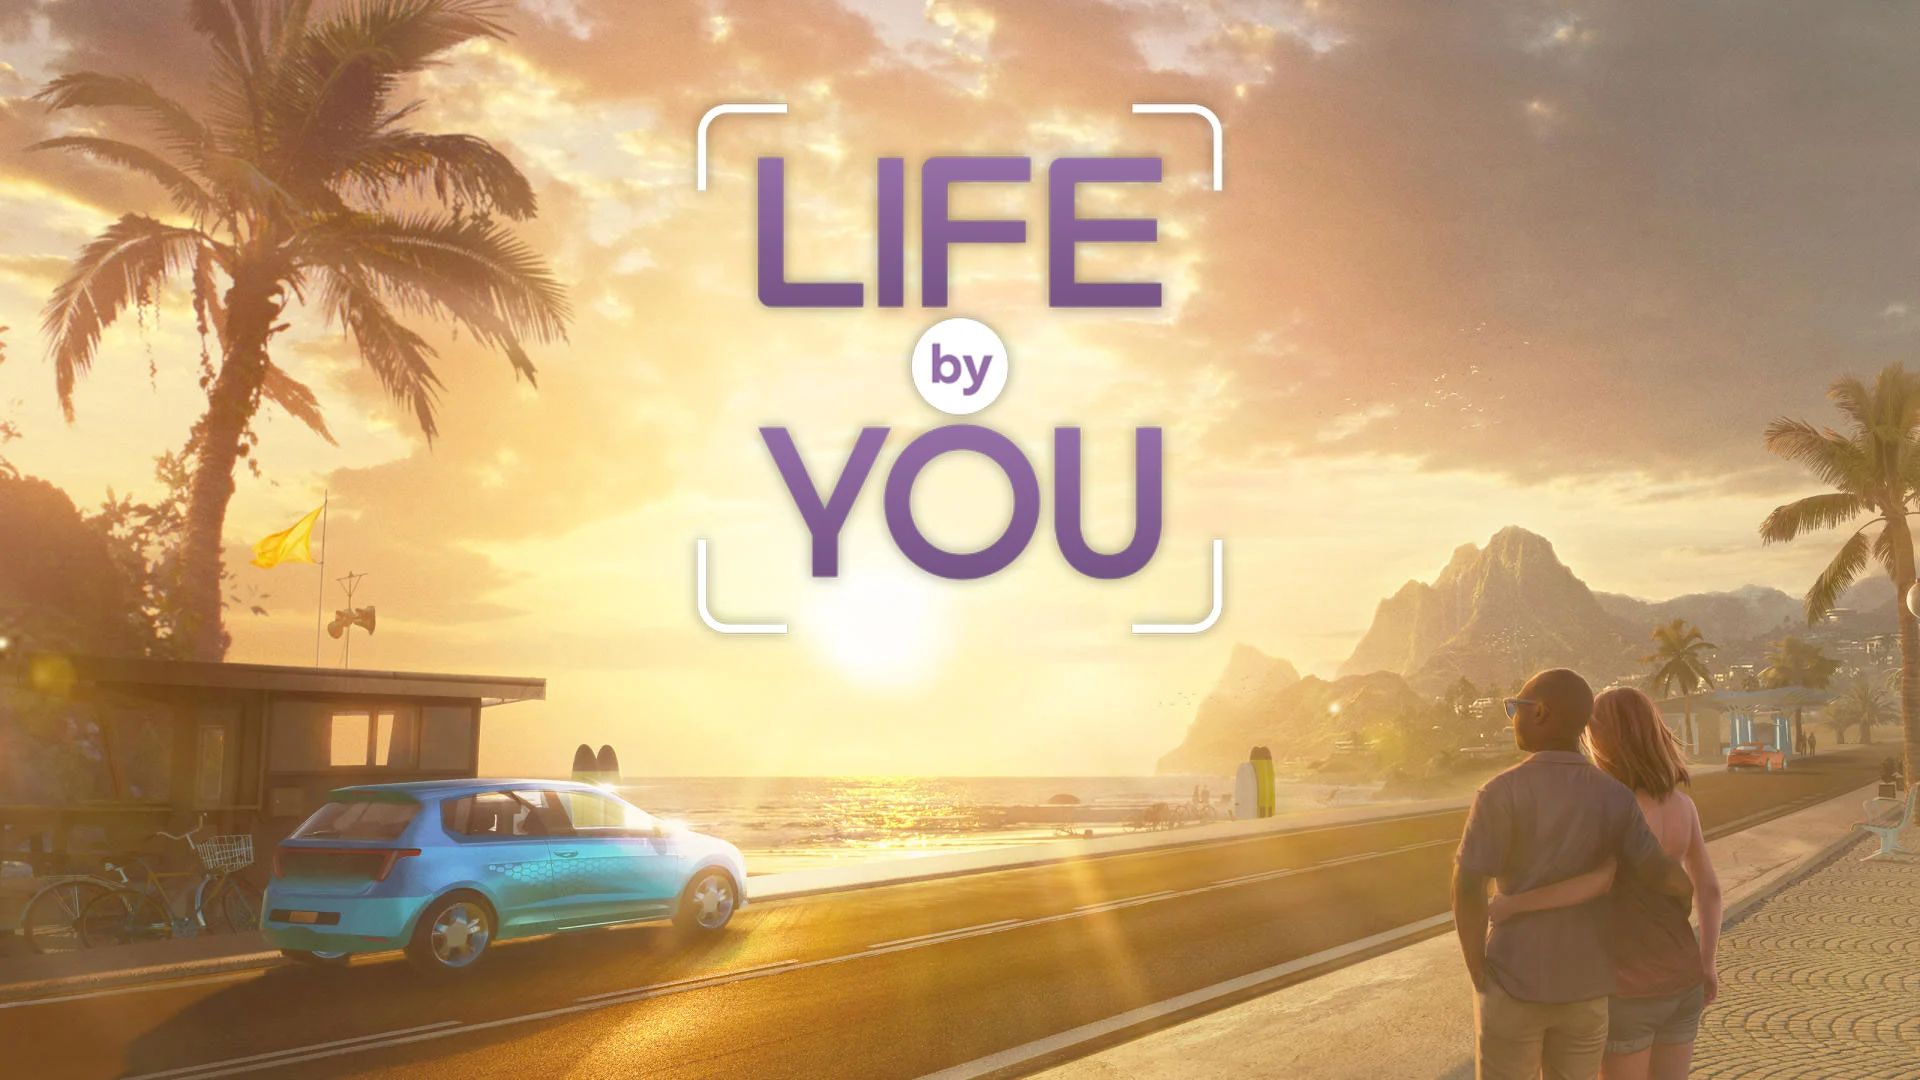 Life by You Release Date, Trailer, and What We Know So Far